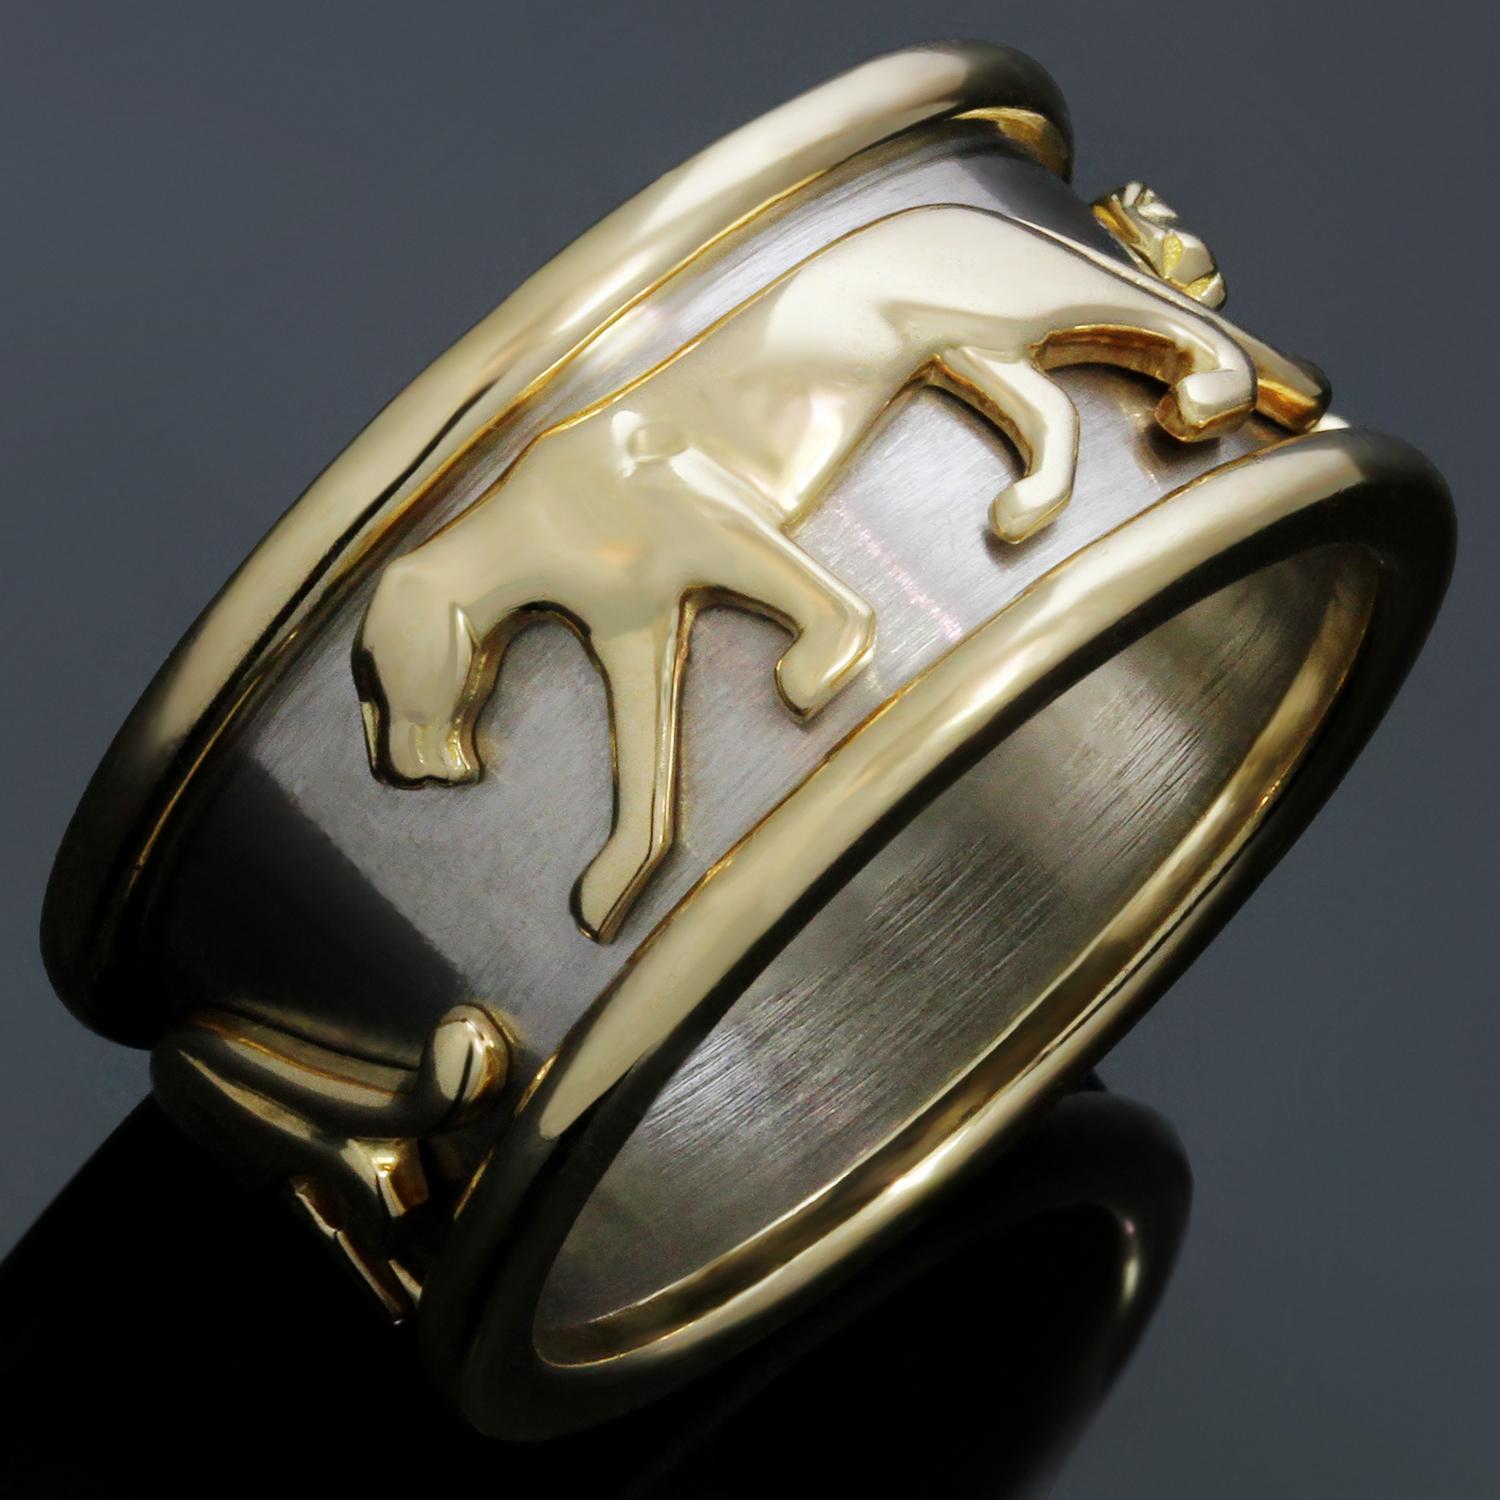 This gorgeous authentic Cartier ring features an 18k white gold band with an alluring design of walking panthers crafted in 18k yellow gold and completed with yellow gold edges. Made in France circa 2000s. Measurements: 0.47